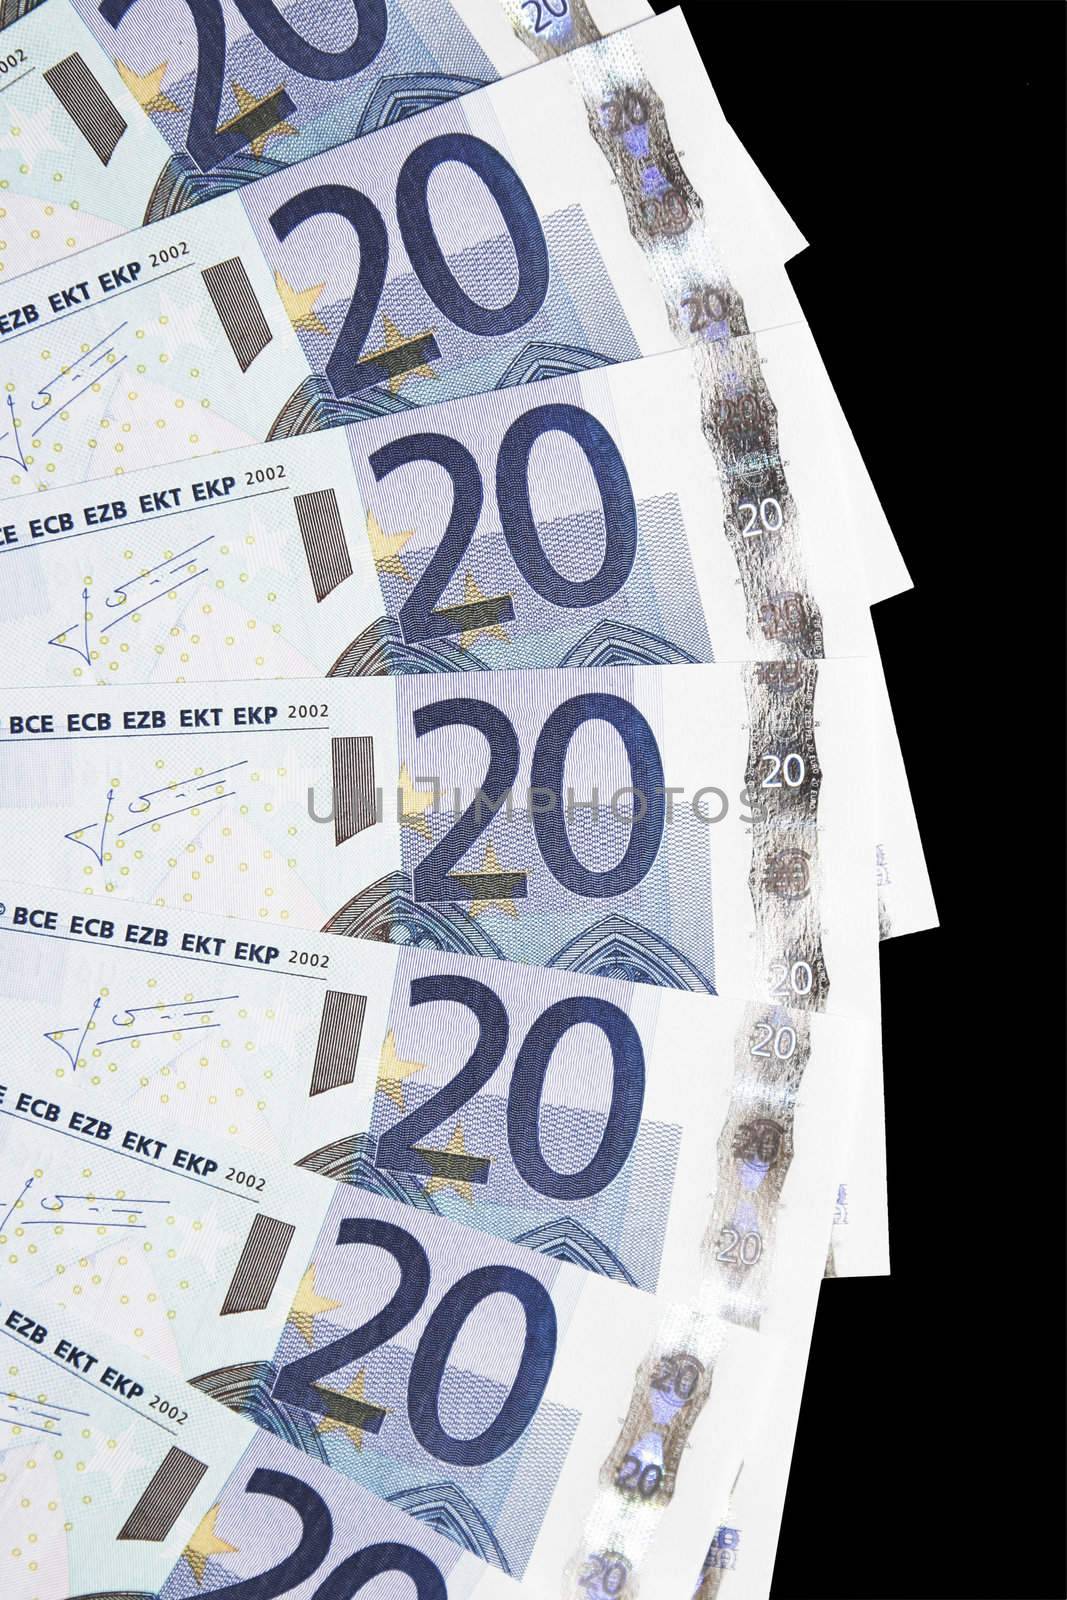 Money - Details Of 20 Euro Notes Laid Out As Fan